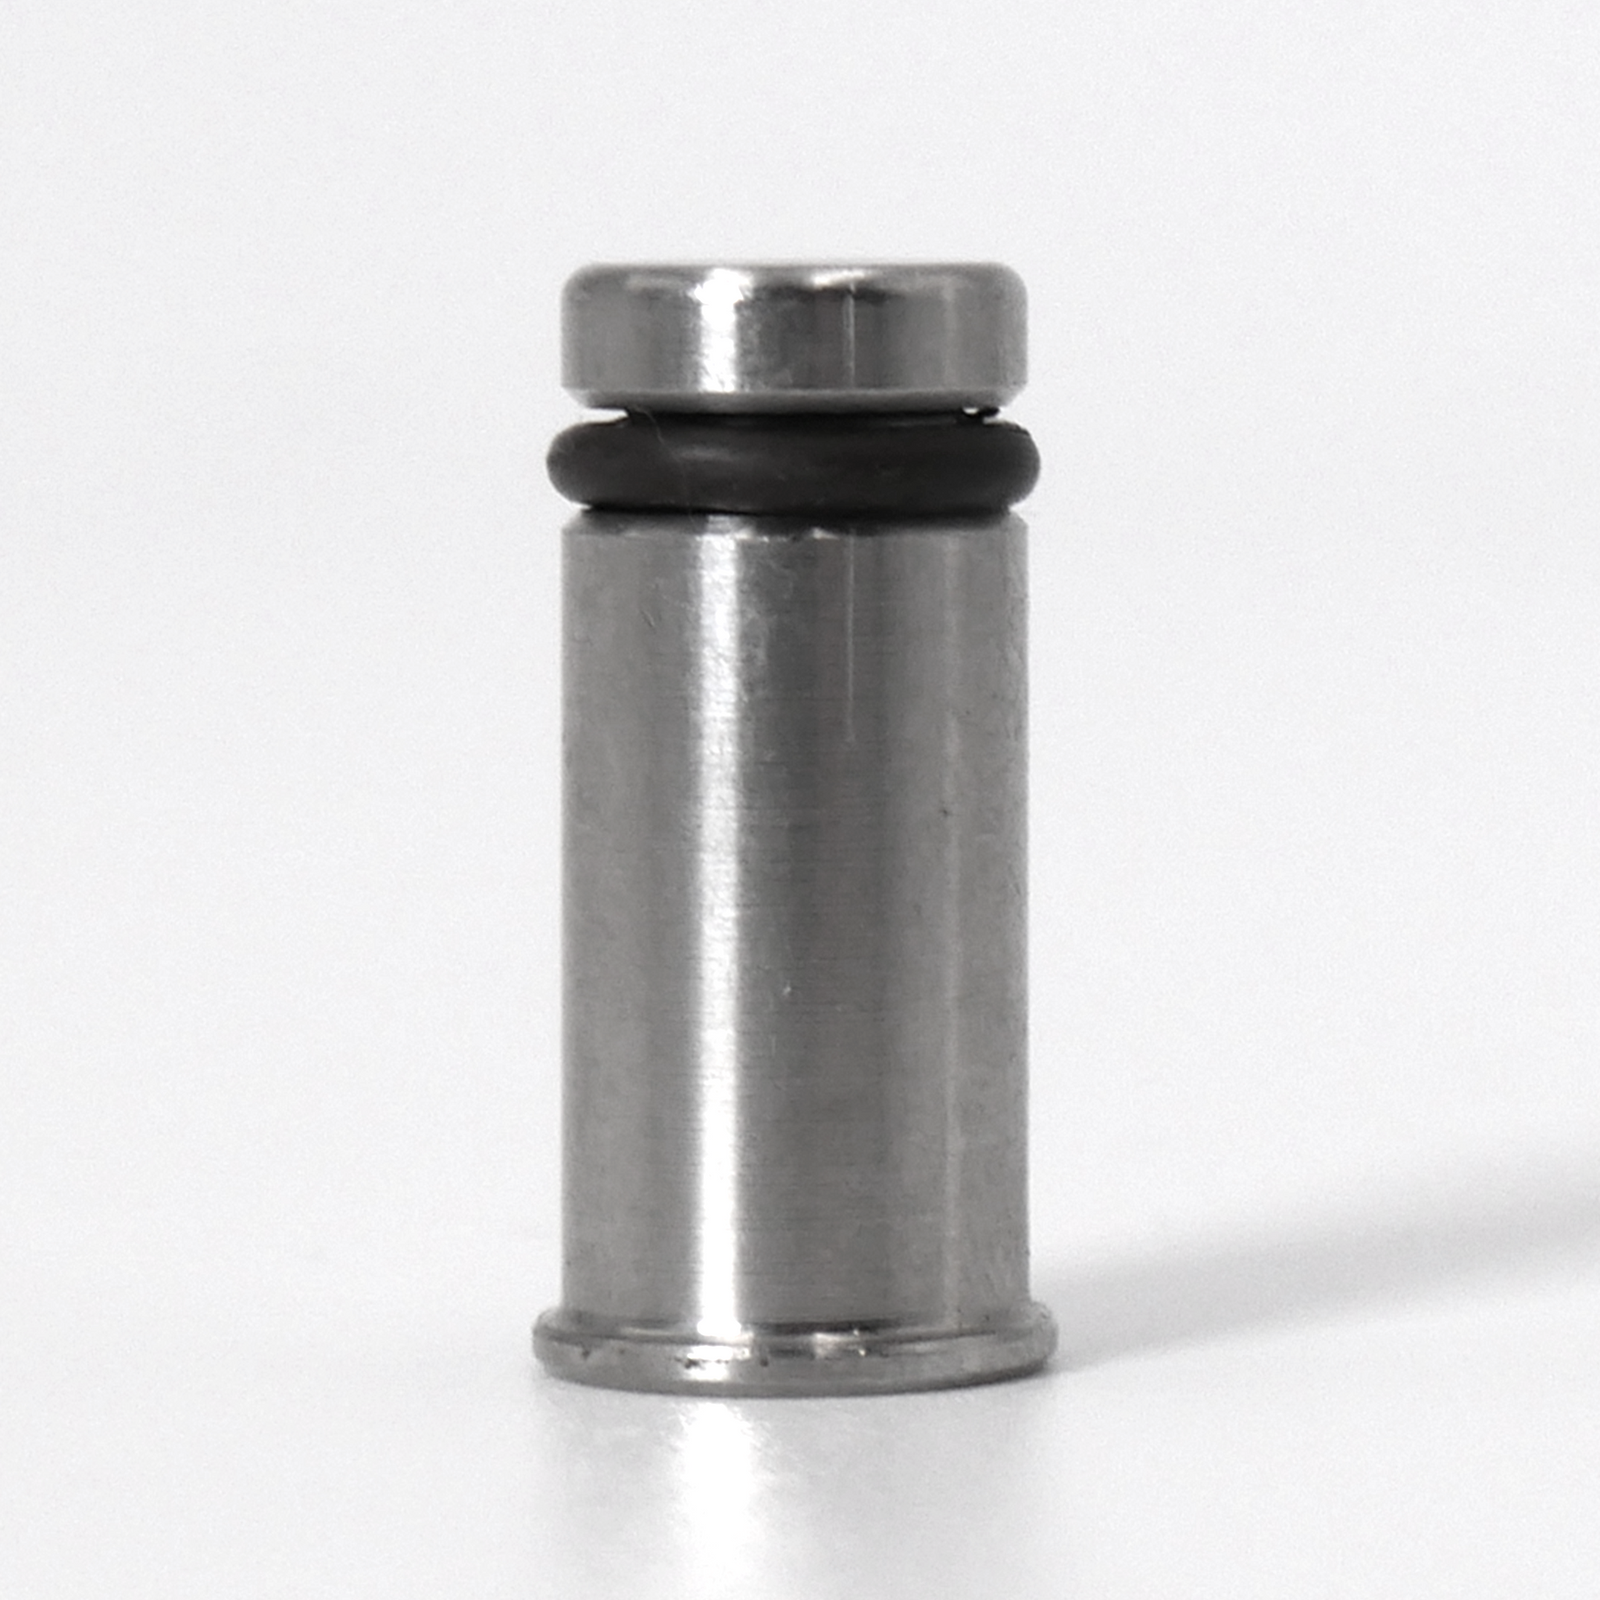 9.7mm non drip tip spare part for piston fillers